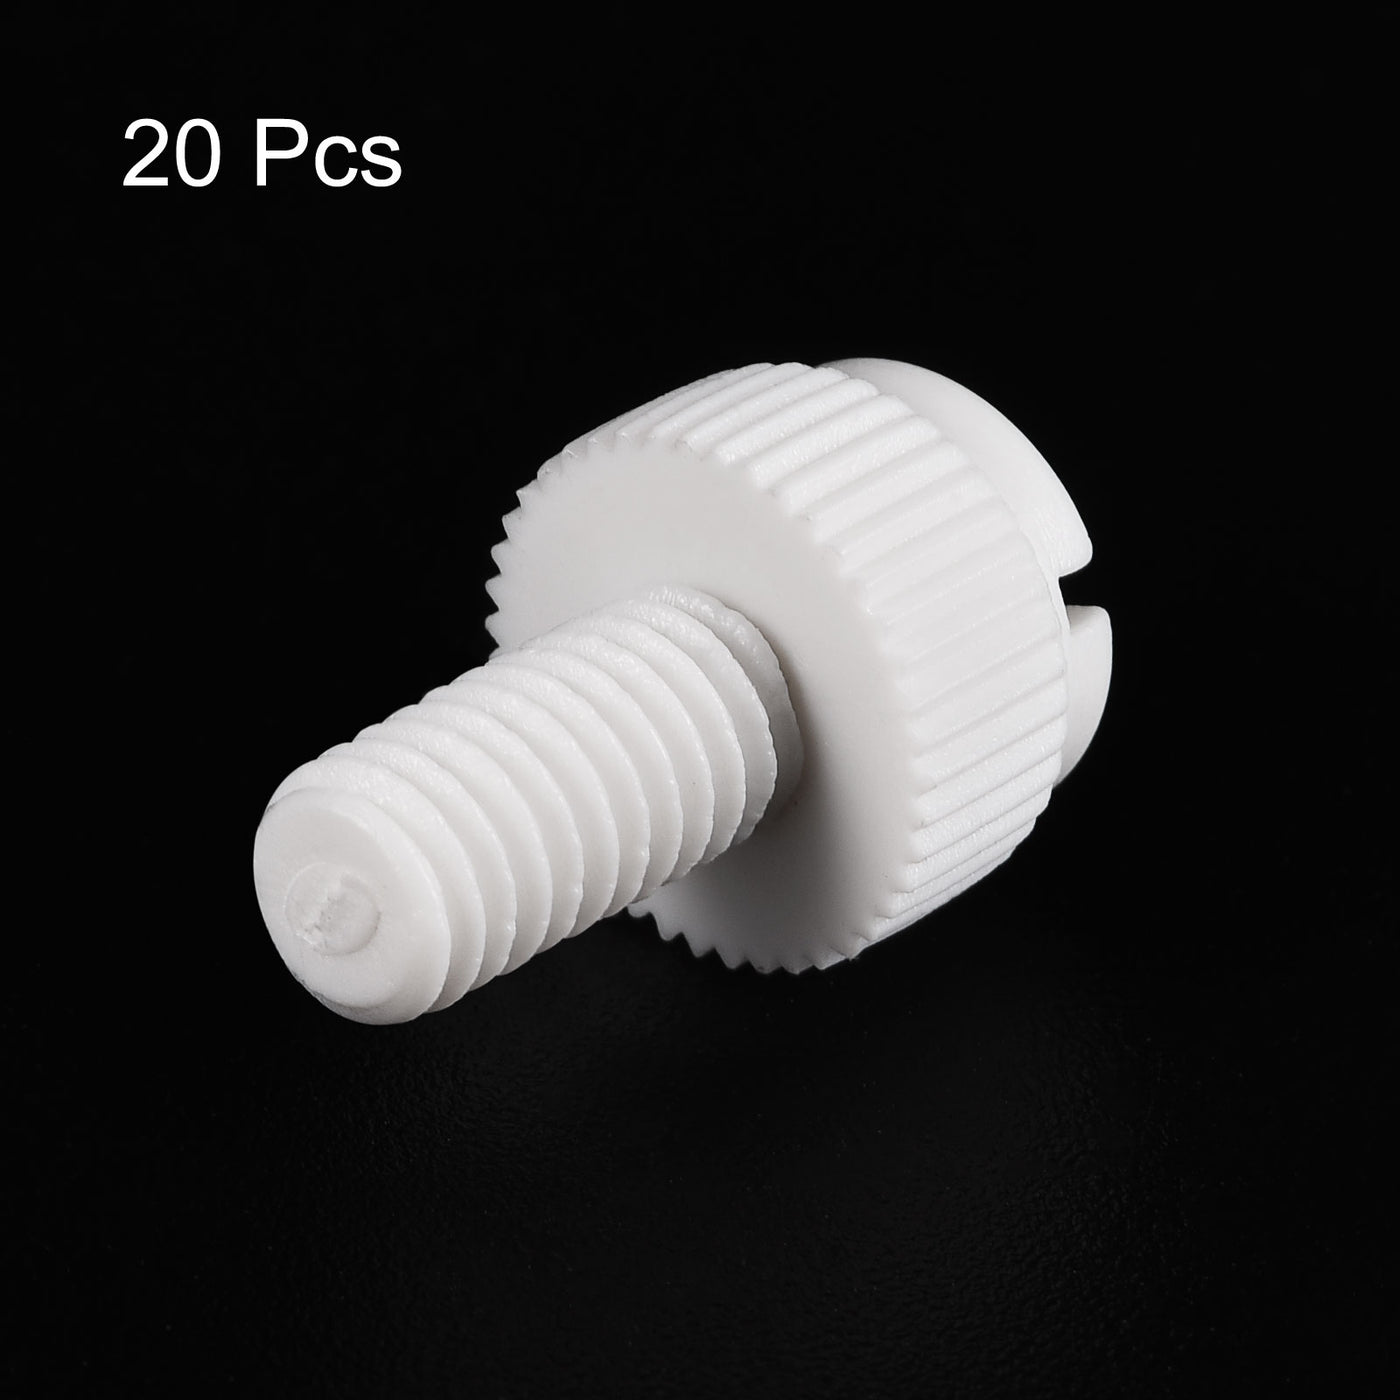 uxcell Uxcell Plastic Machine Screws Slotted Knurled Fasteners Bolts for Electronics, Communications